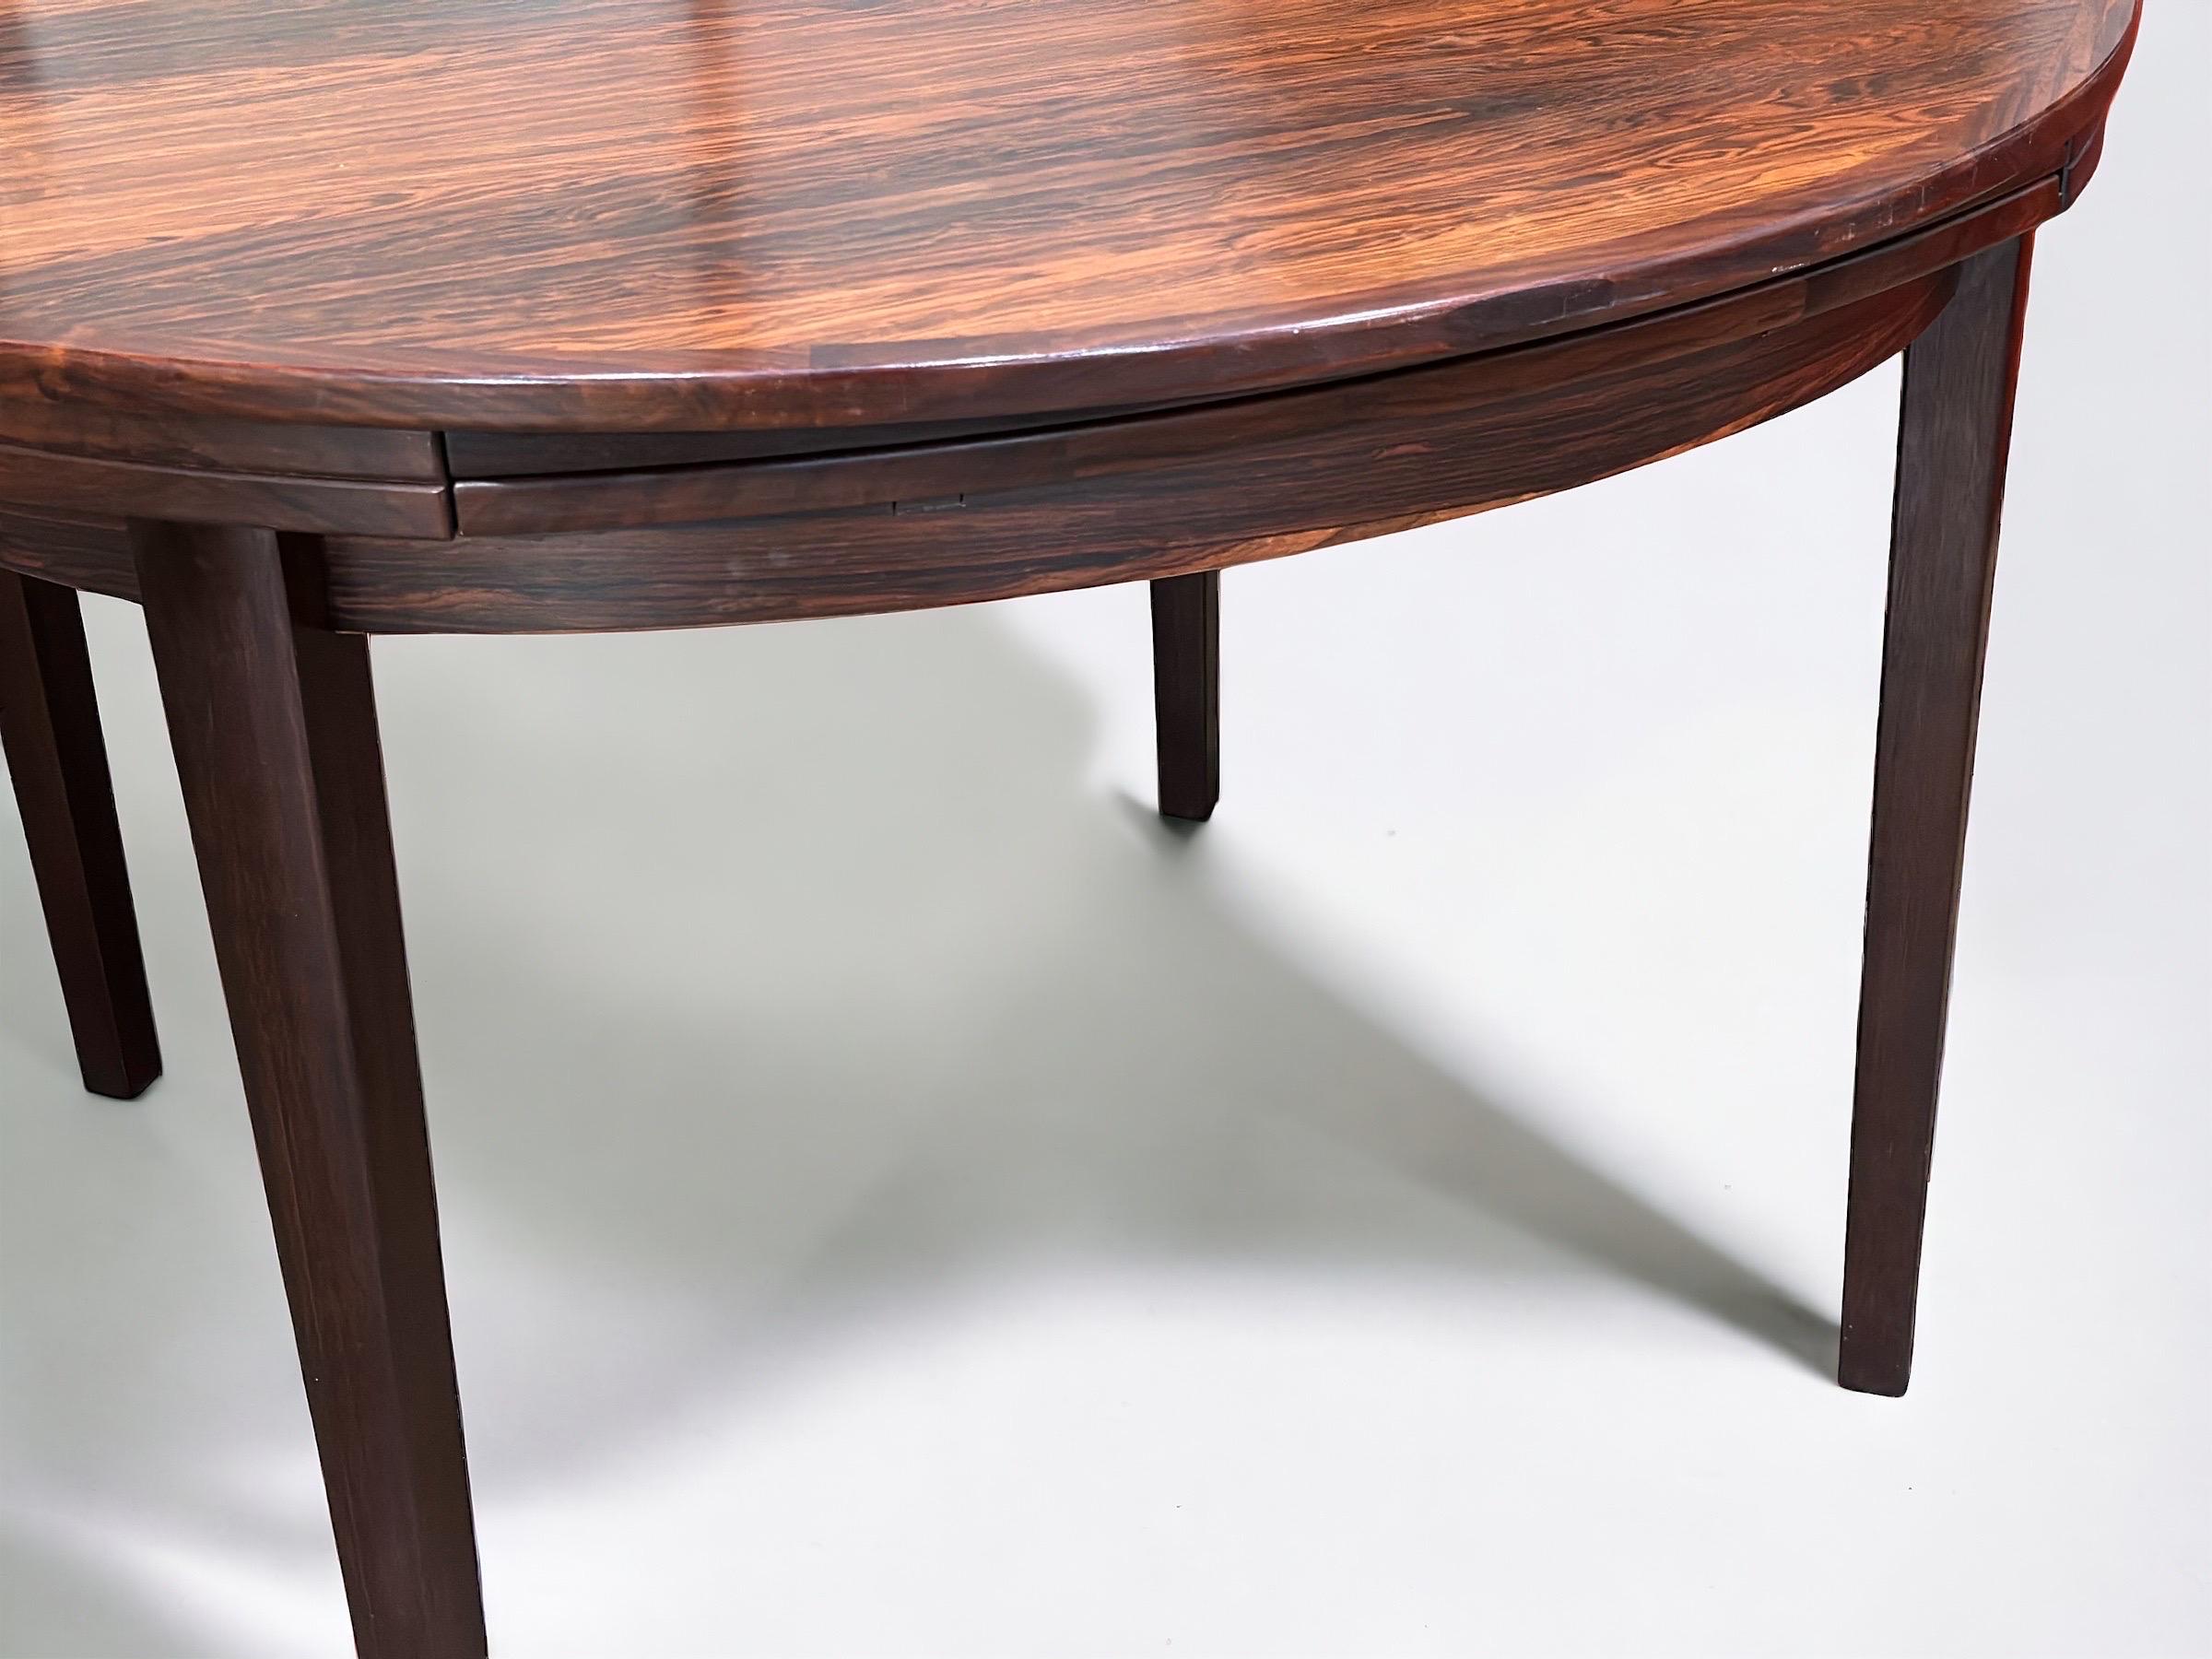 Dyrlund Lotus Table - Danish Rosewood Flip Flap Expanding Round Dining Table 1